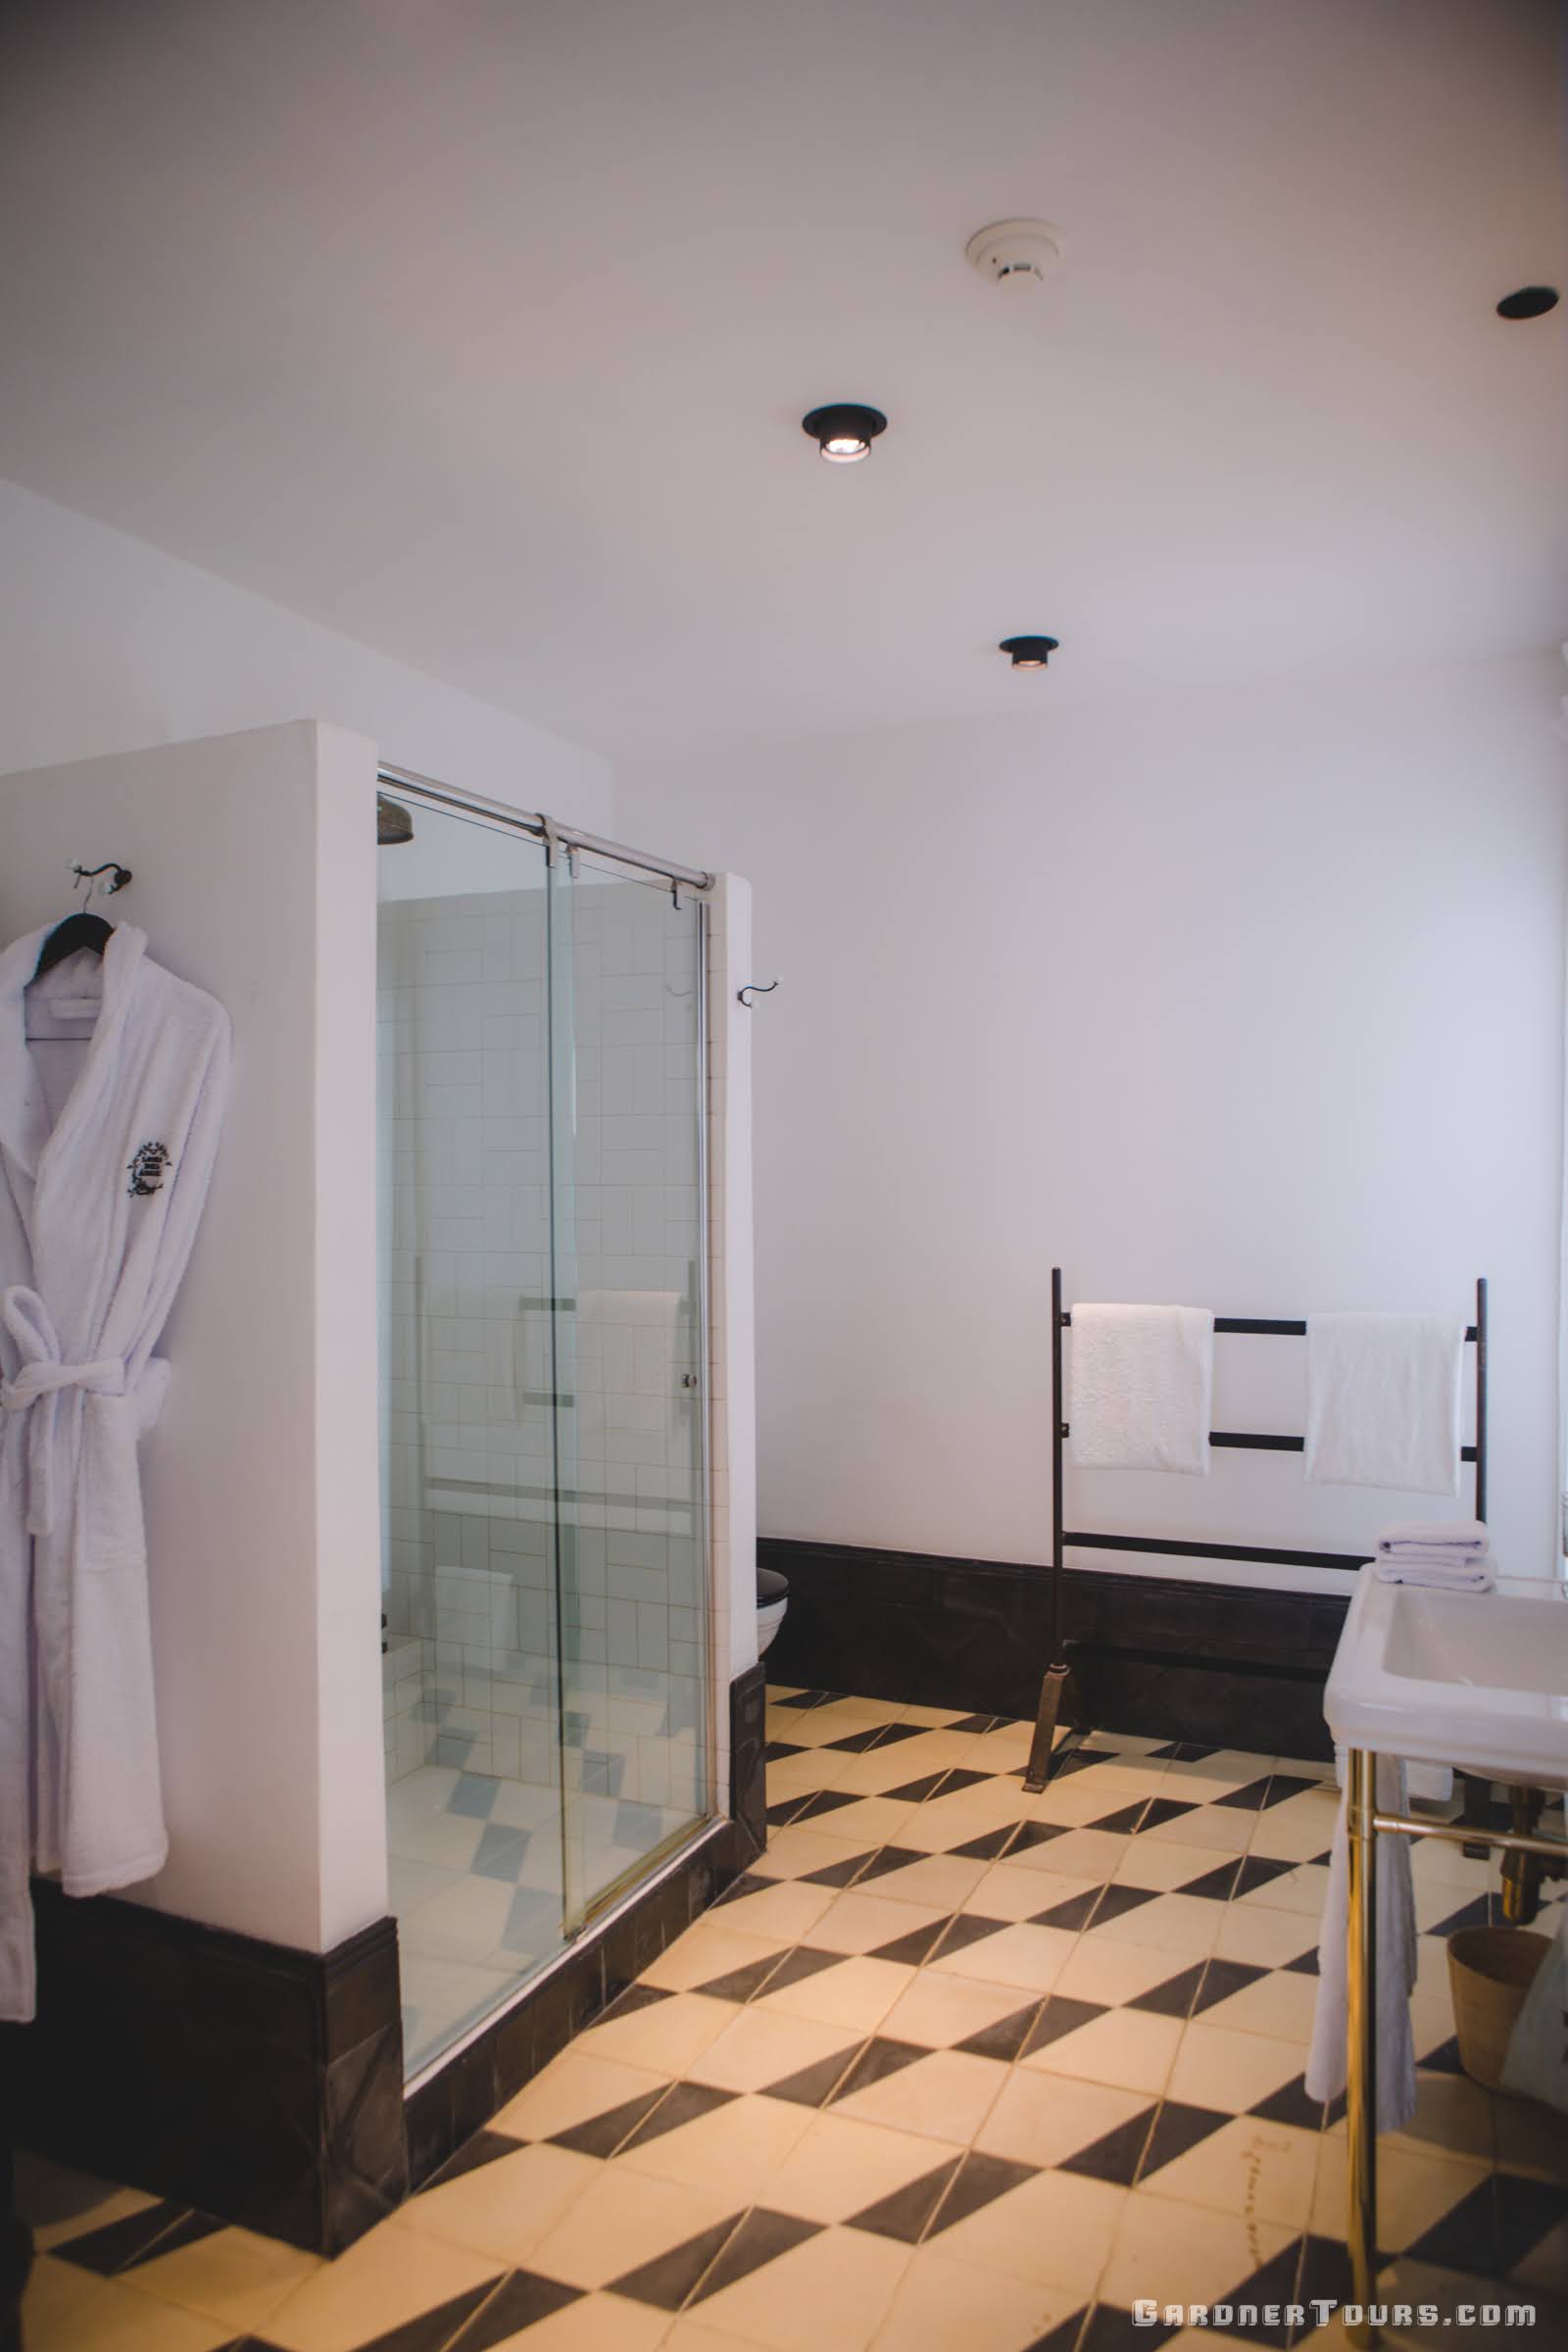 Luxurious Bathroom with Shower and Gold, Black, and White Decor in 5-star Luxury Accommodations in Old Havana, Cuba